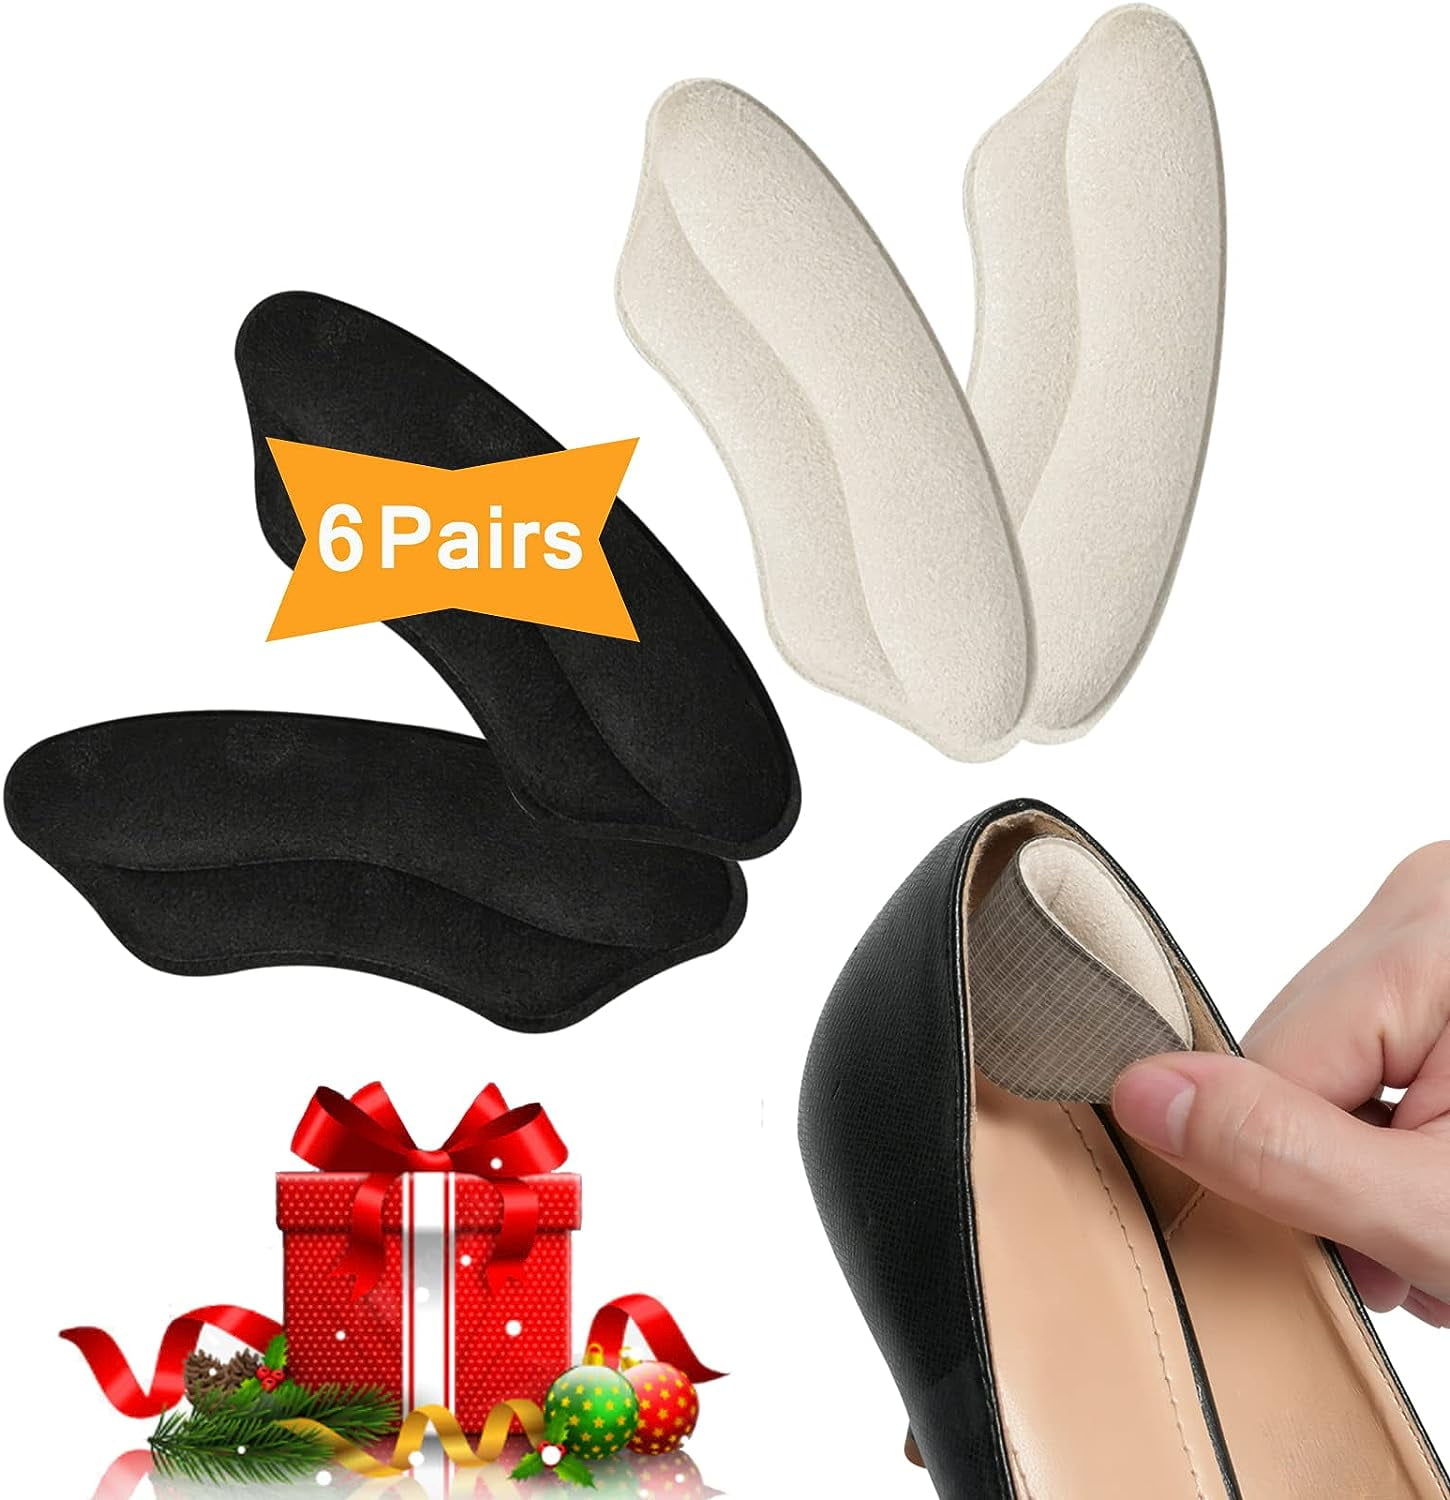 4 Pairs Heel Cushion for Loose Shoes,Heel Grip Inserts Heel Pads for Shoes,Rubbing,Blisters  Heel Sticker for Shoes Too Big Shoes Filler Heel Liner for Leather &  Running Shoes - Walmart.com